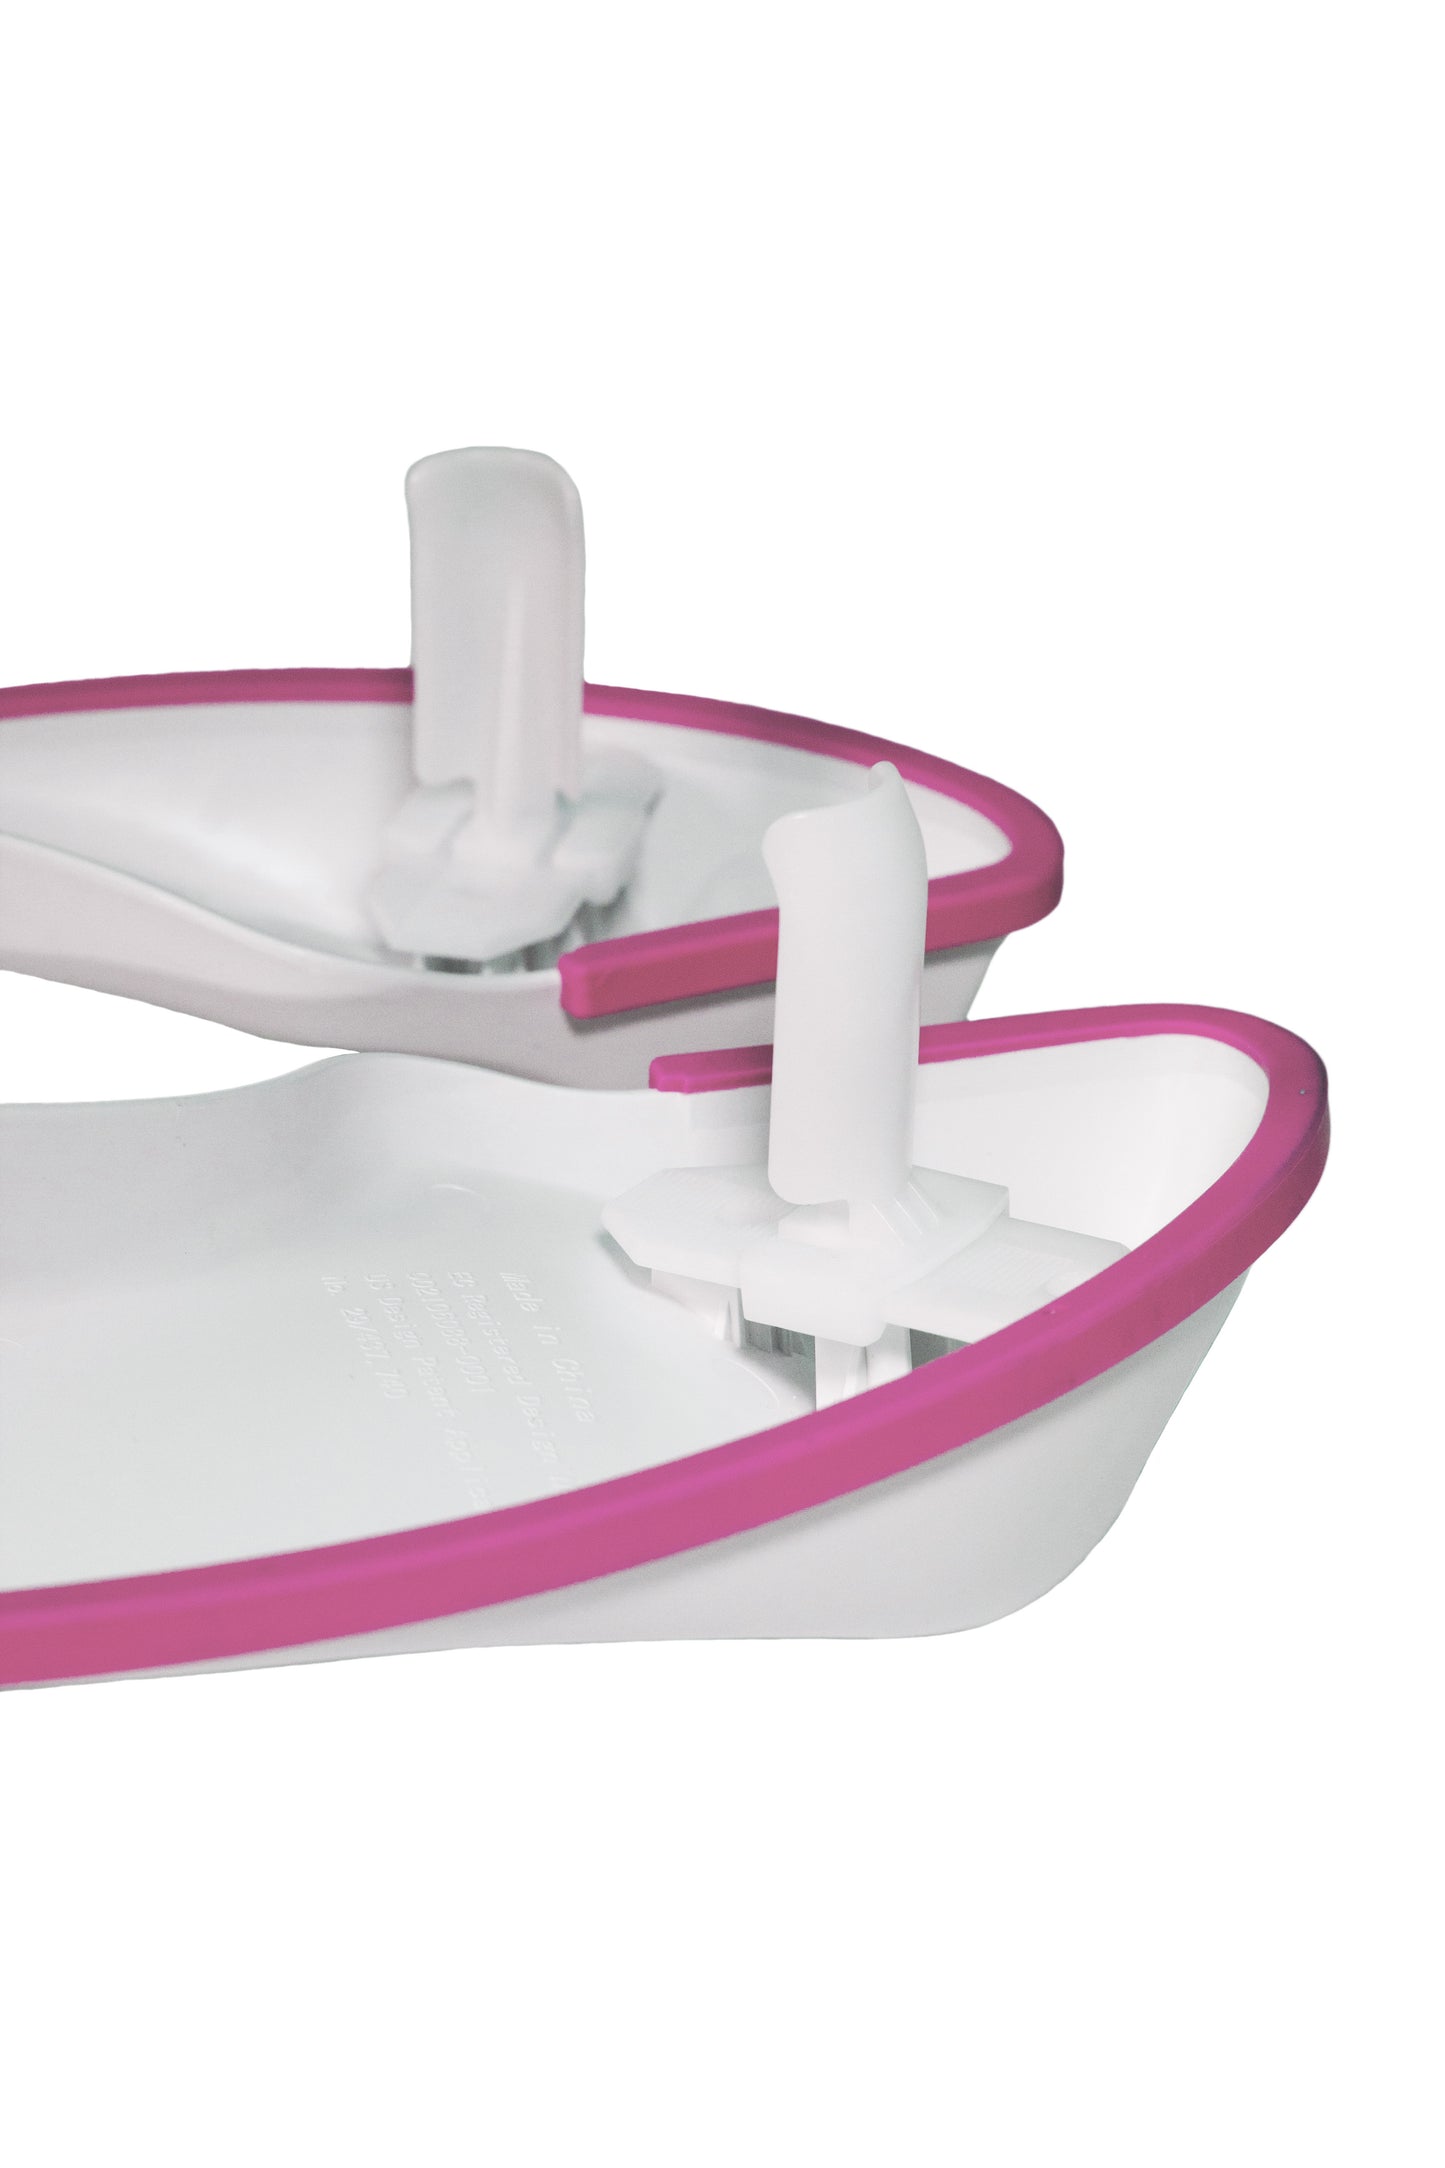 Pourty Flexi-Fit Toilet Trainer Pink